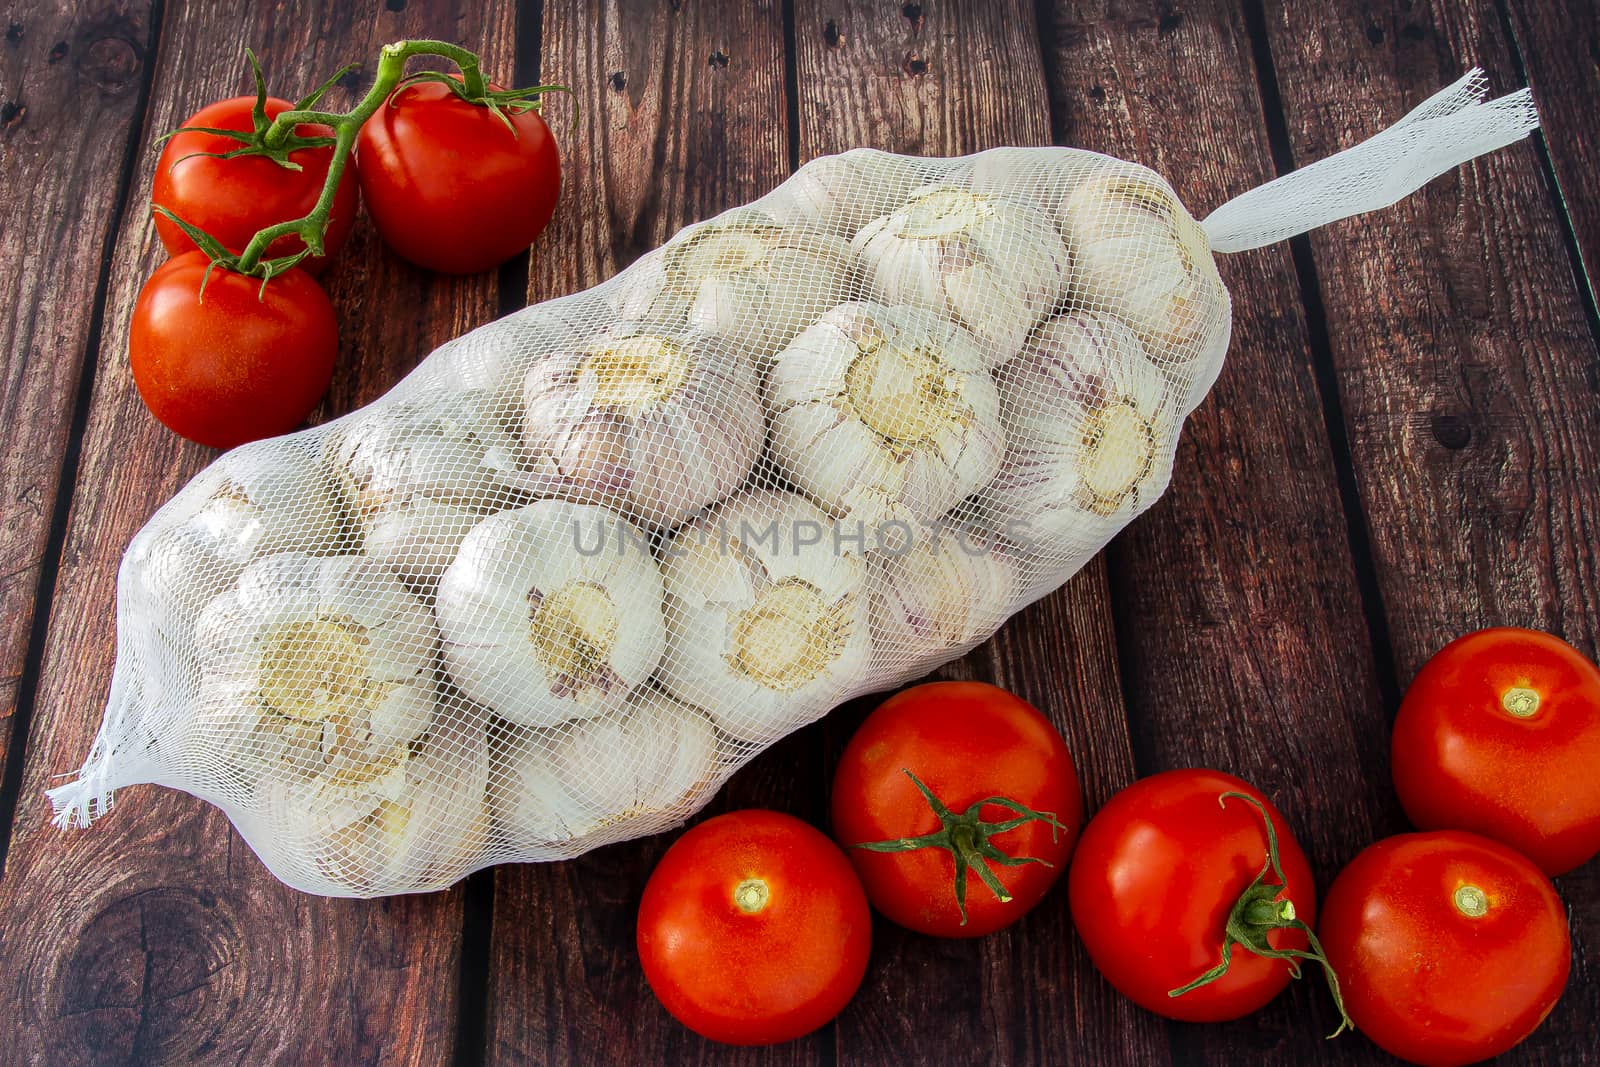 A bag of fresh garlic with tomatoes on a wooden table